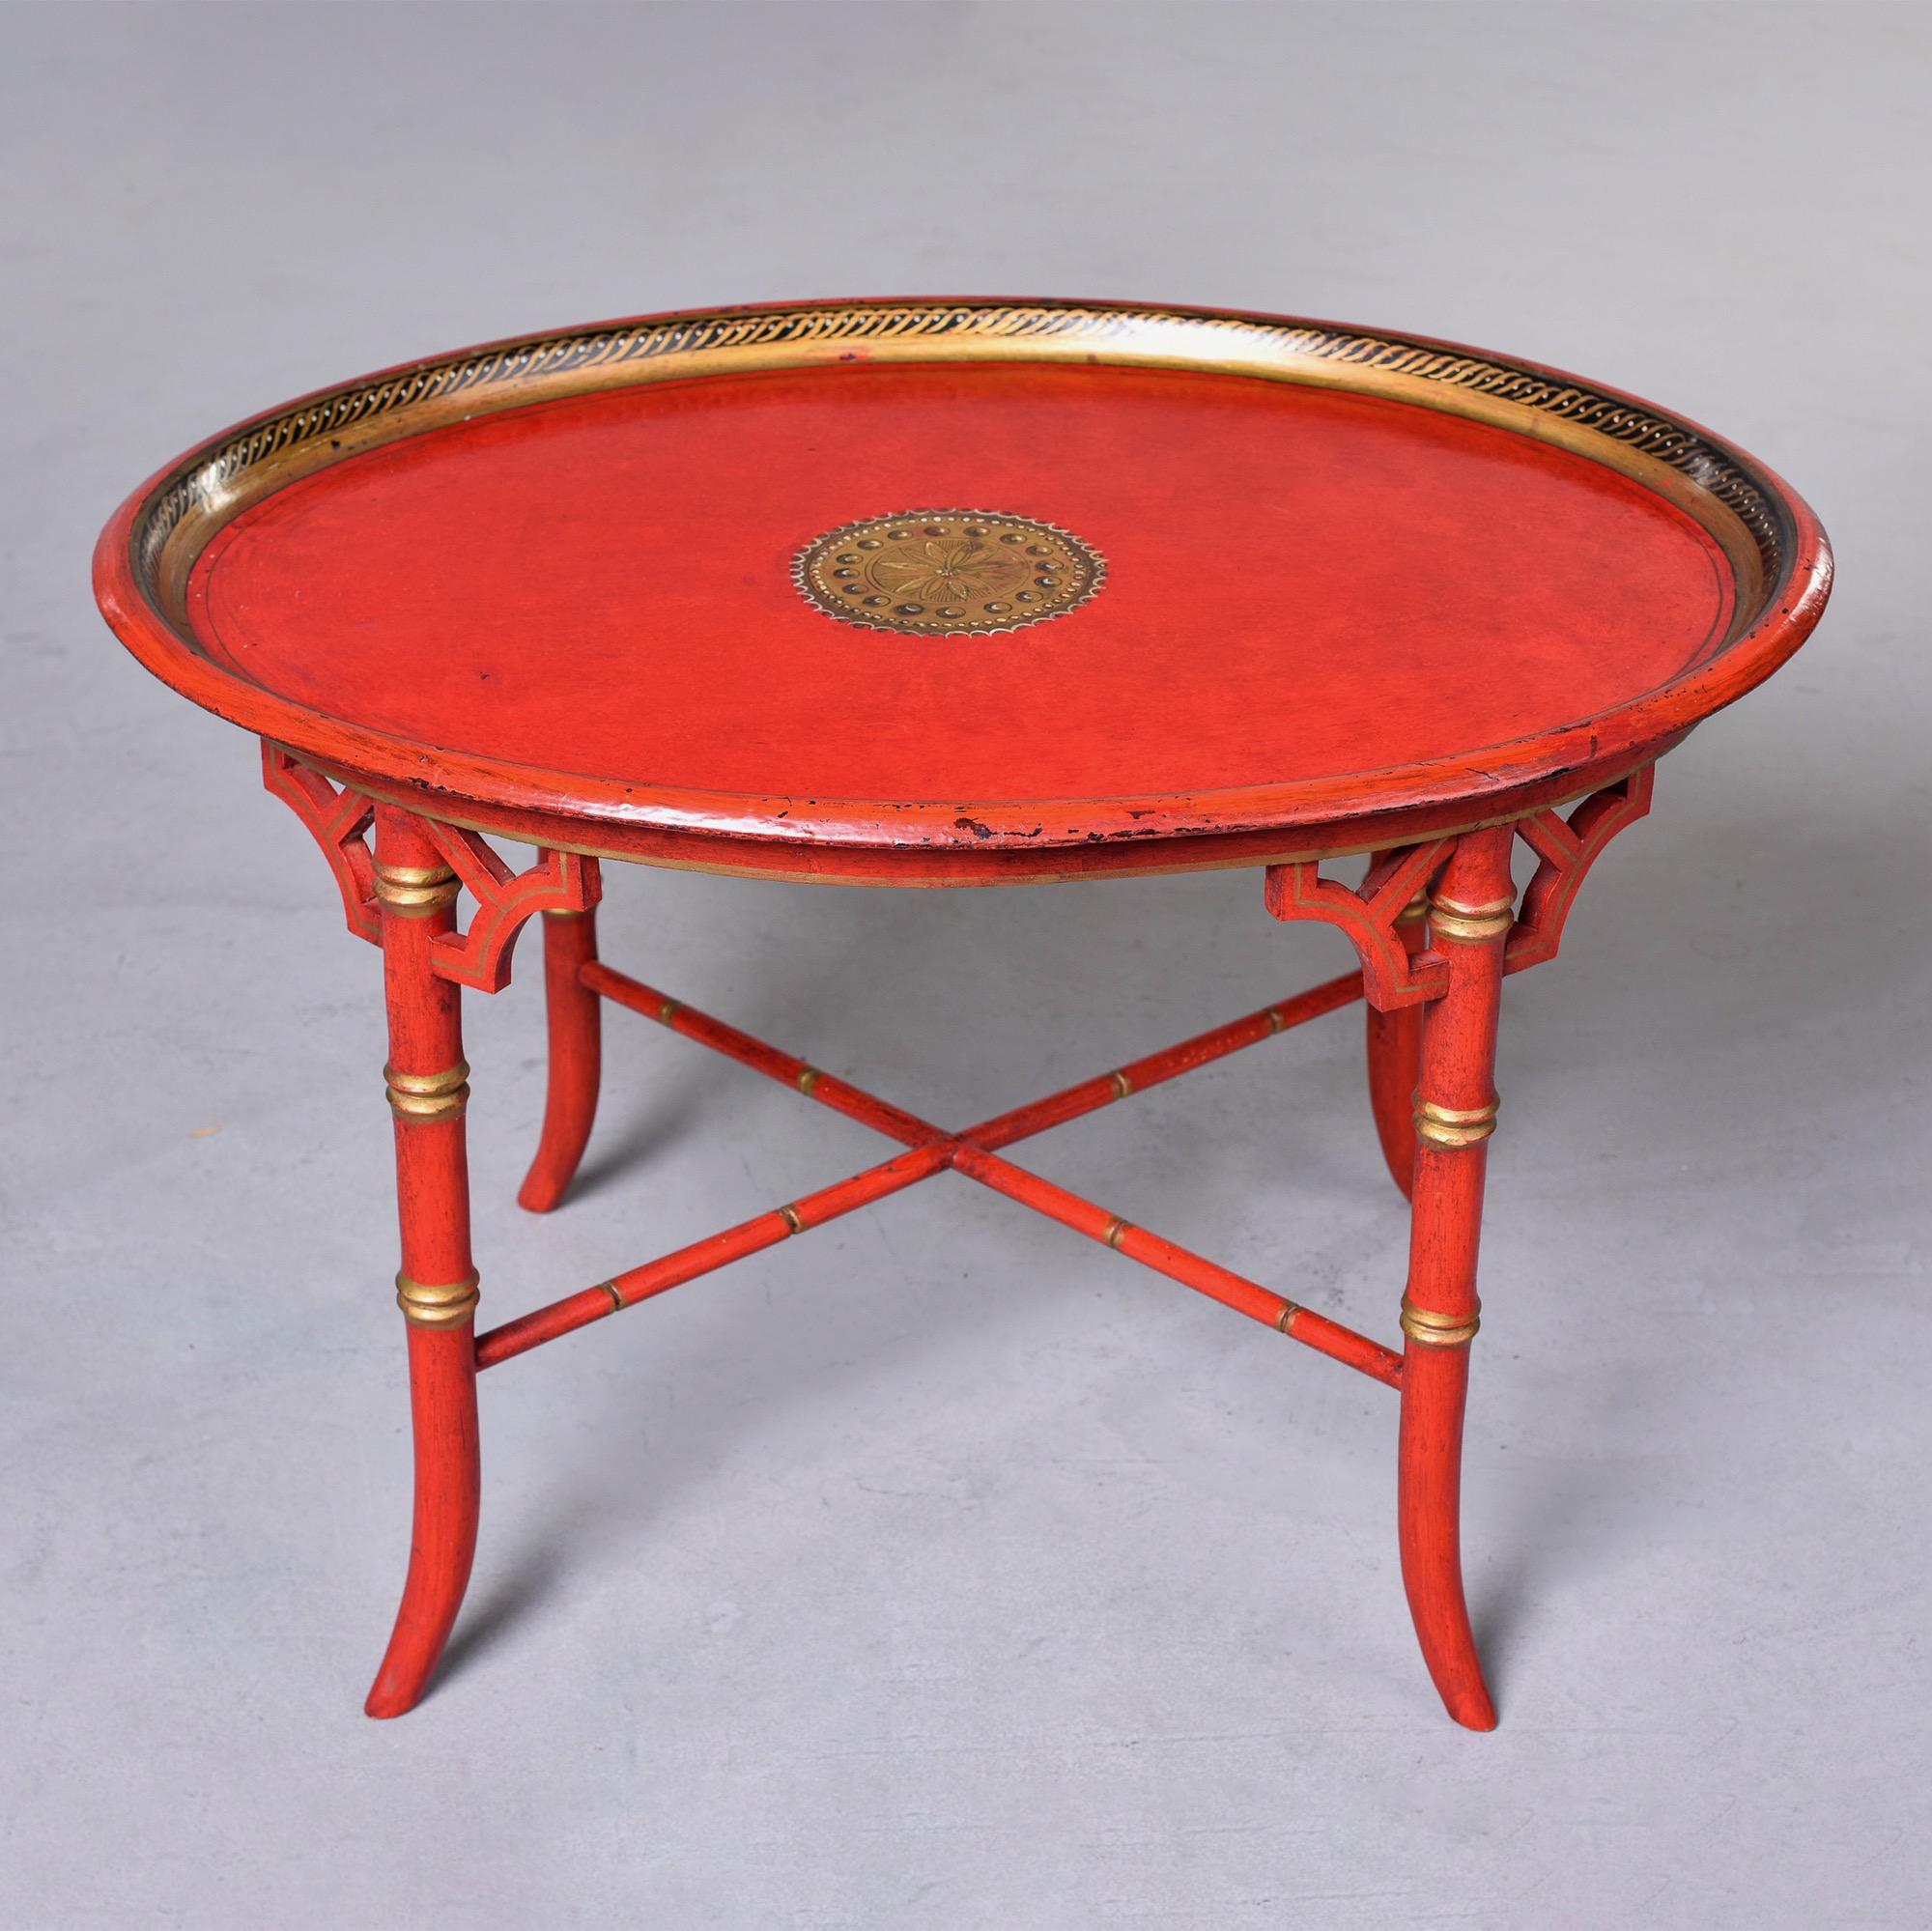 Found in England, this circa 1930s red oval Chinoiserie style side table features a faux bamboo base with X-form stretcher and gilded details. Oval table top has a decorative painted gilt border on inside edge and decorative painted large center